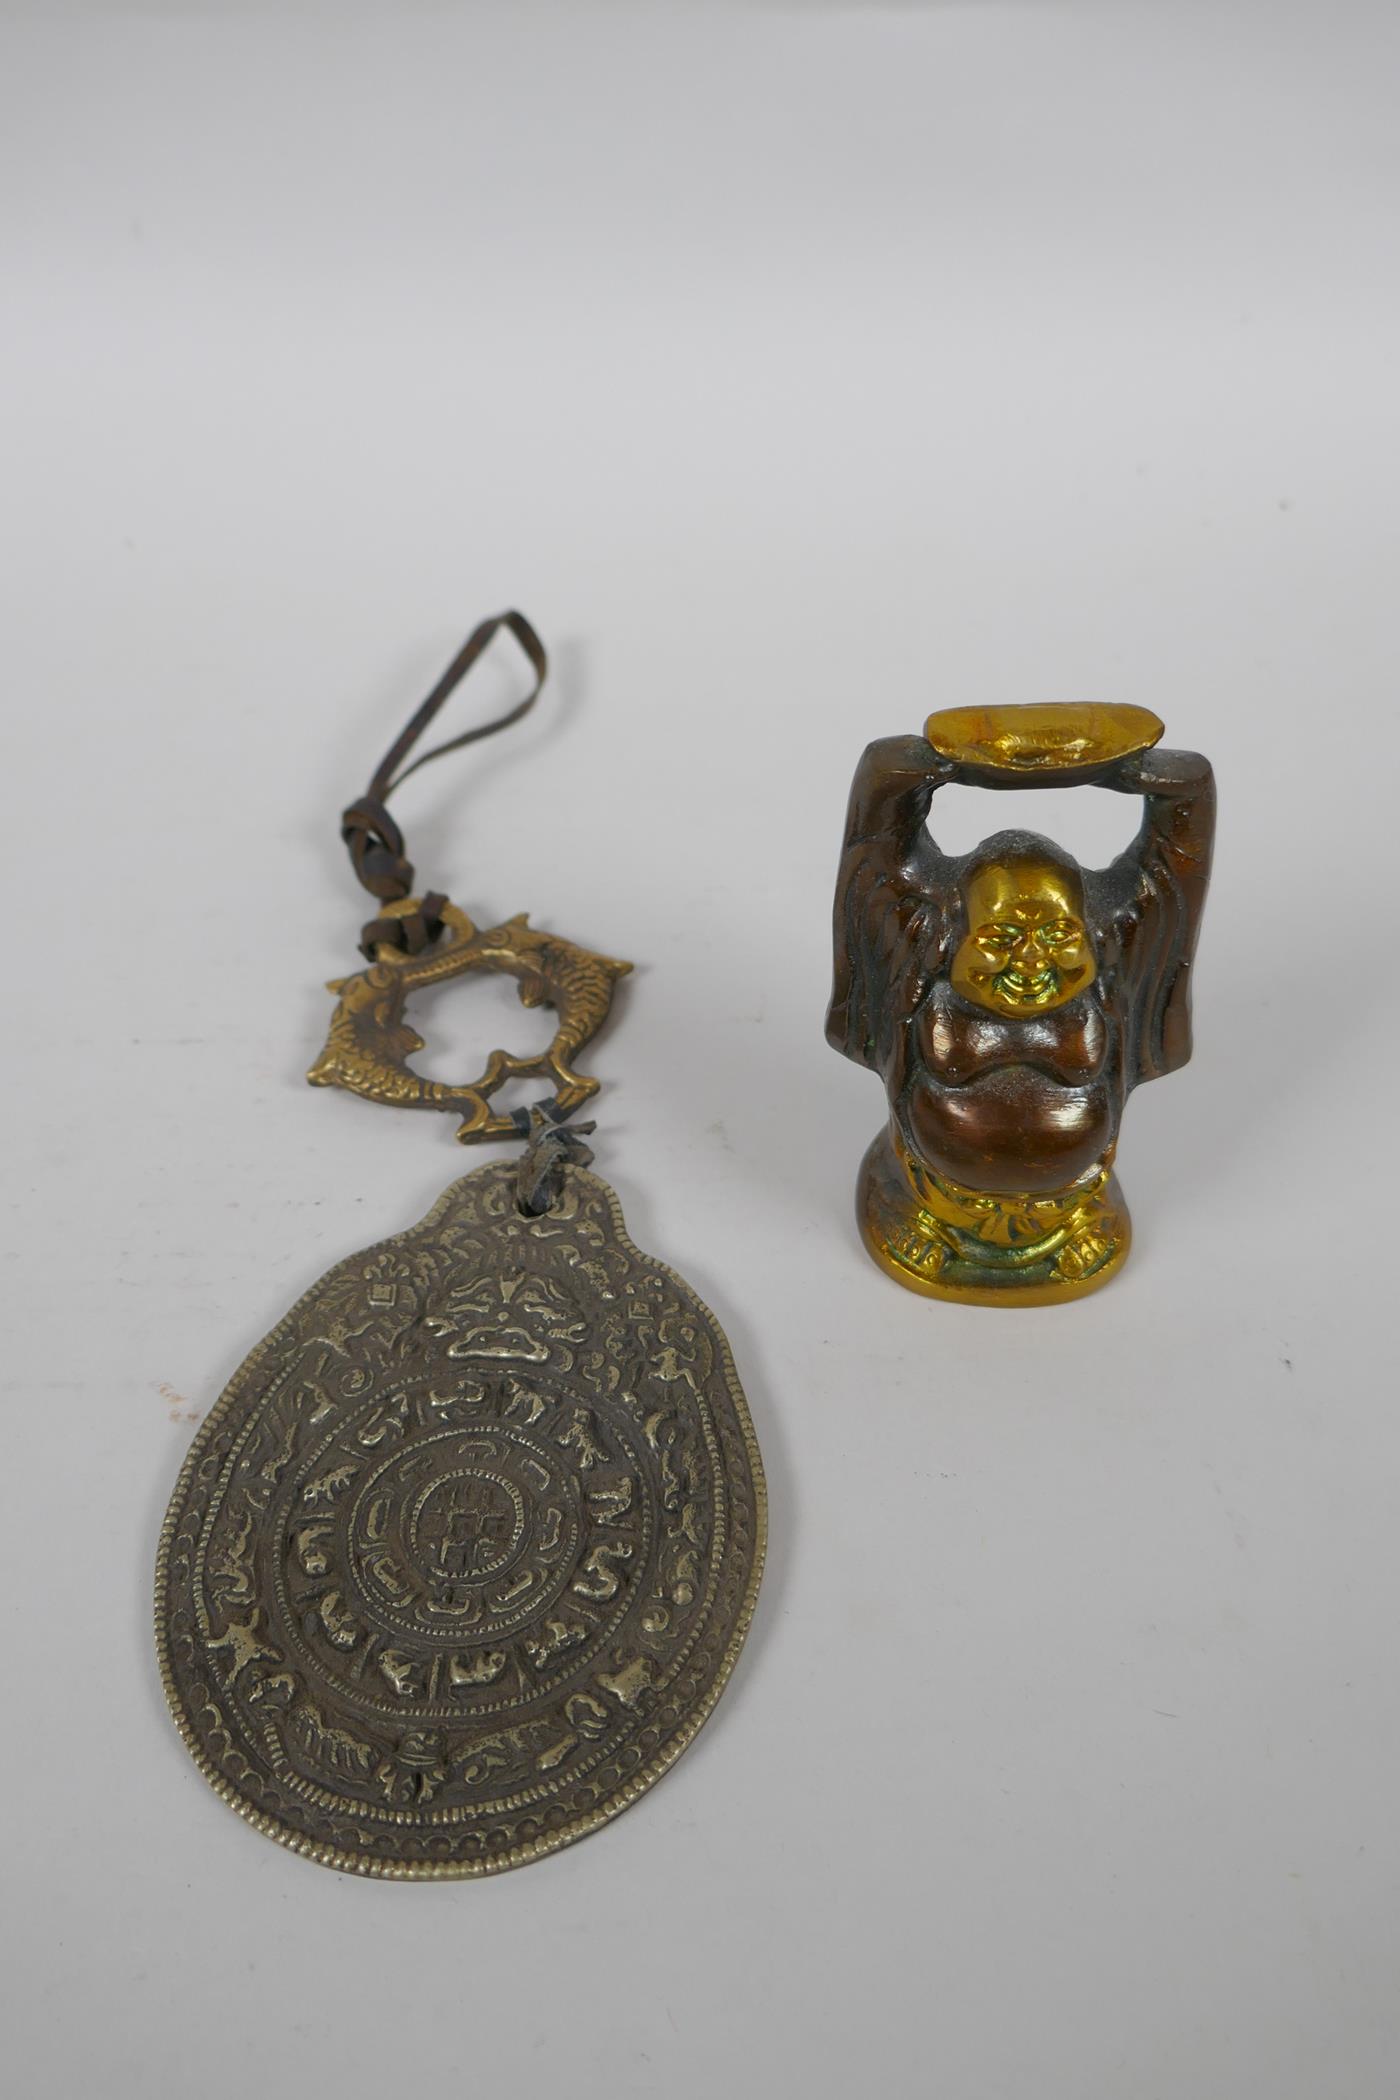 A Tibetan bronze and silvered metal calendar pendant, together with a bronze figure of a jolly